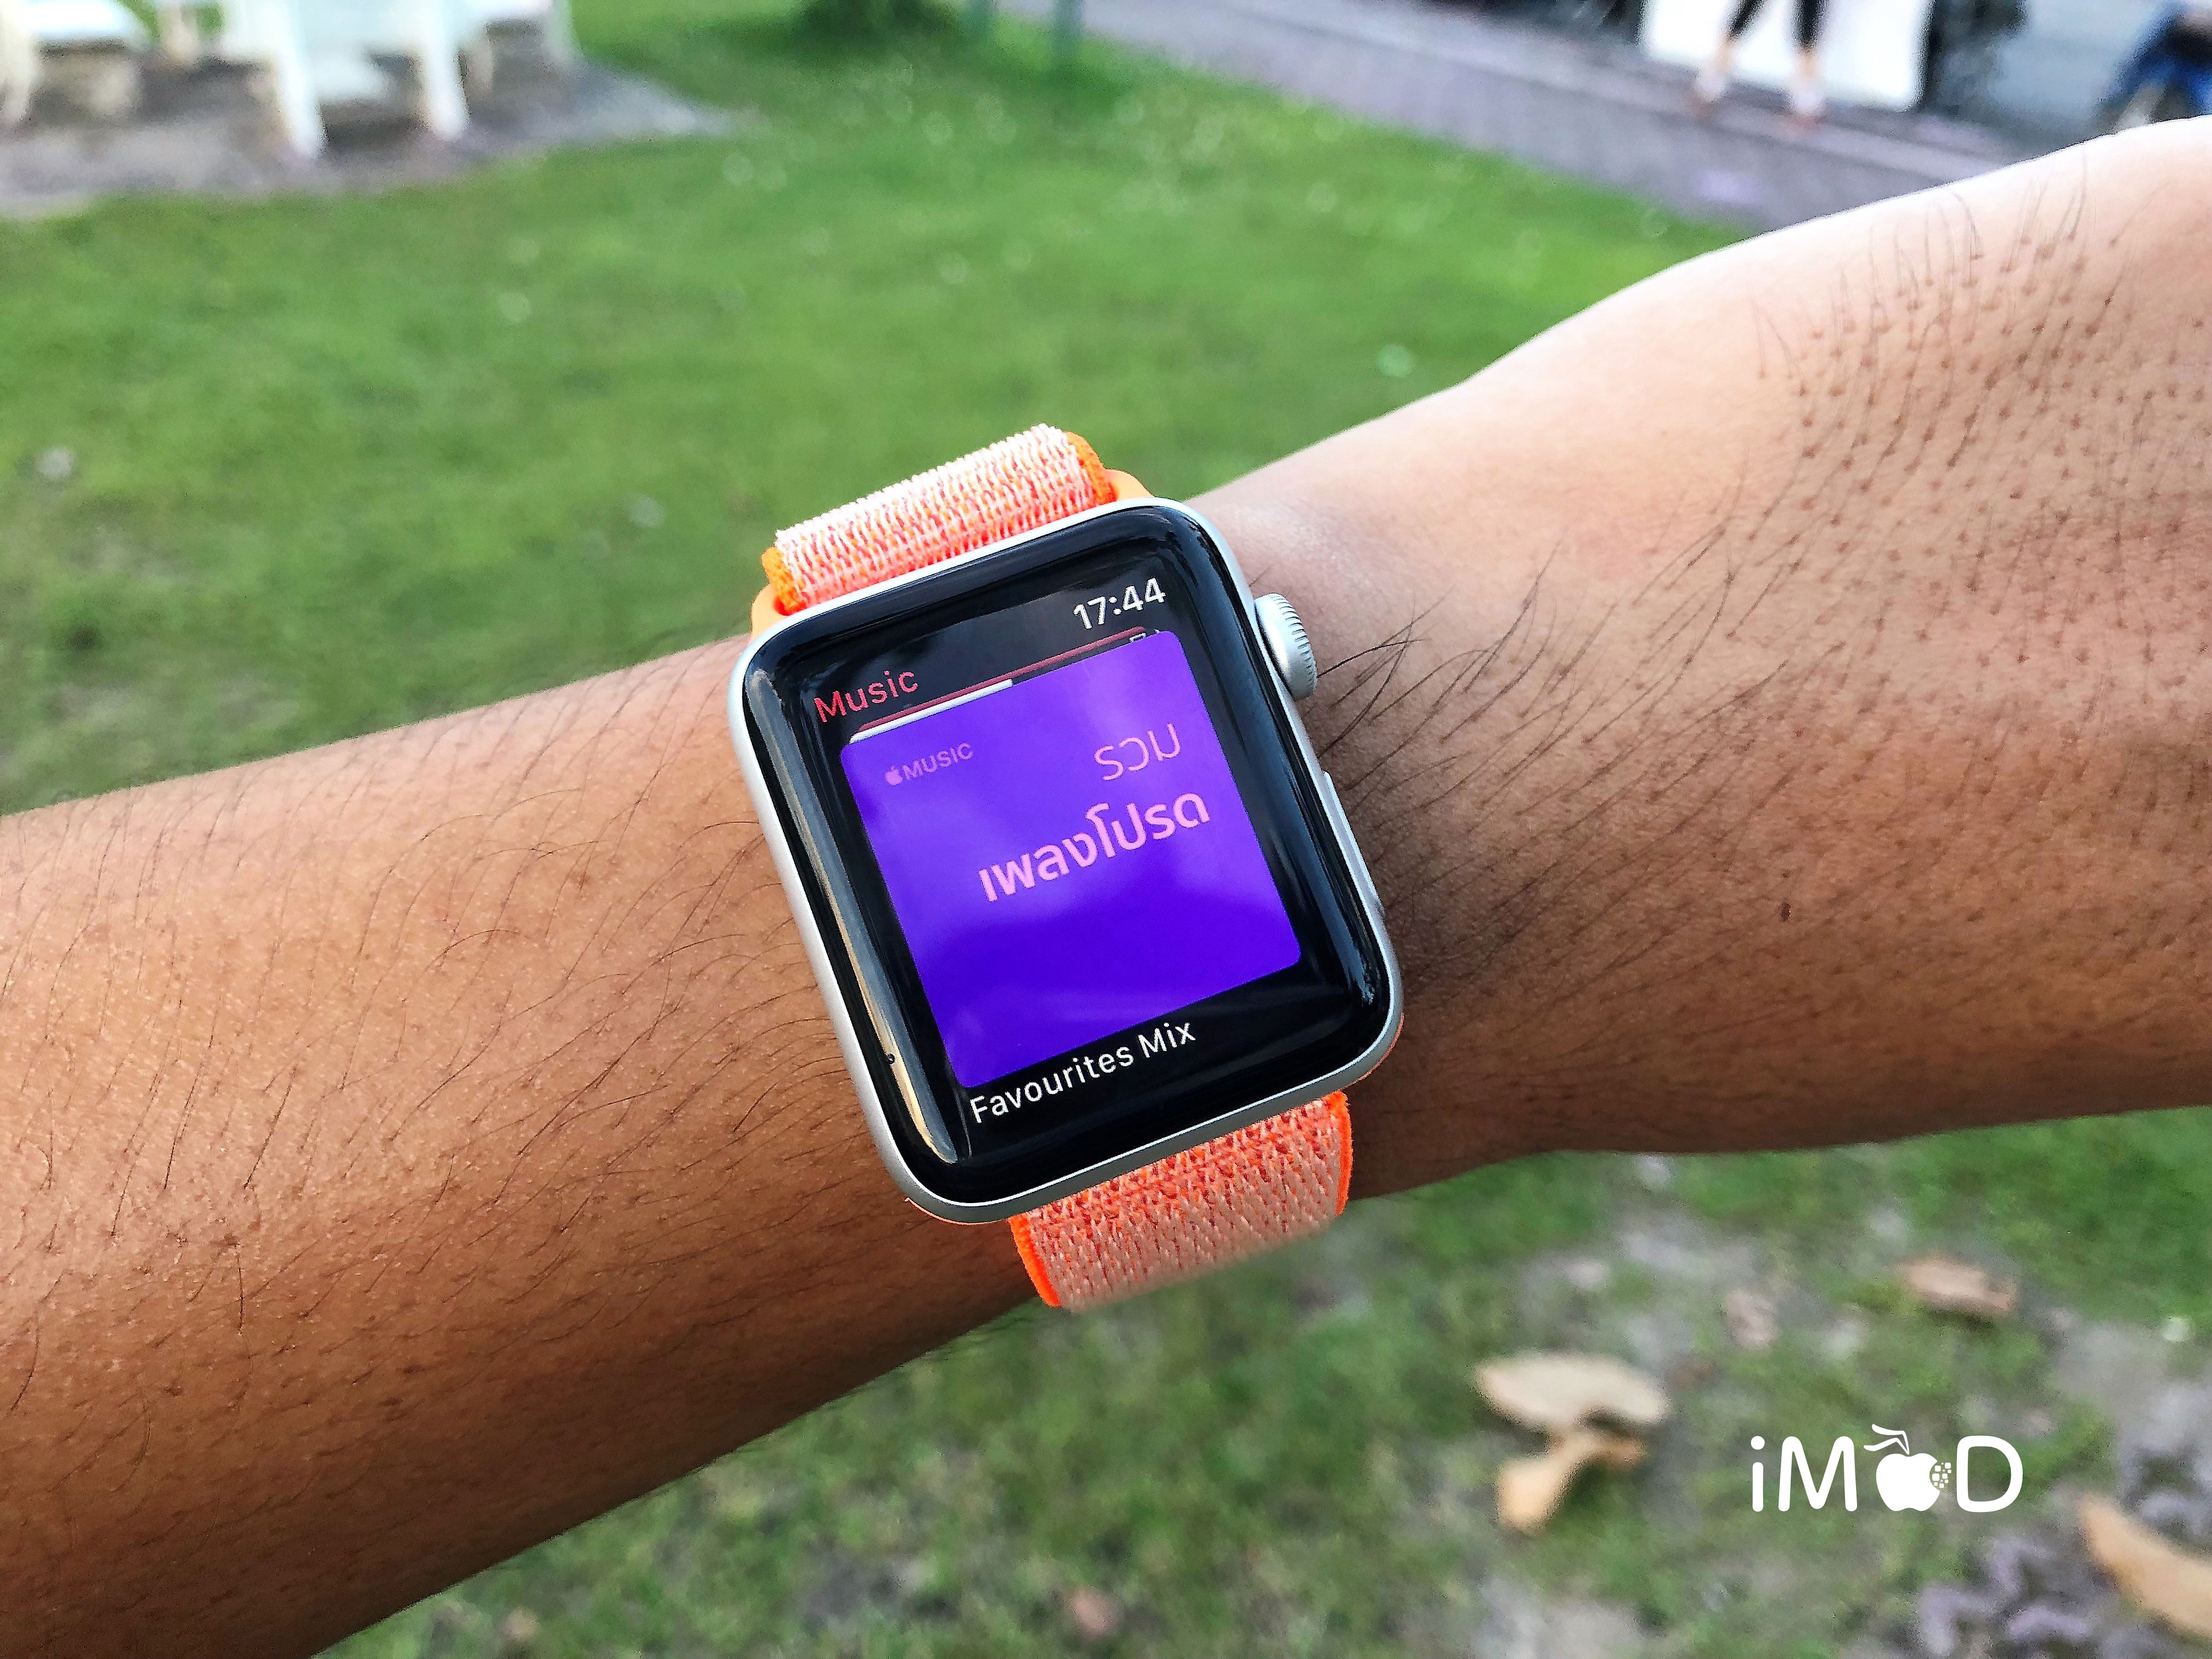 apple watch series 3 gps review